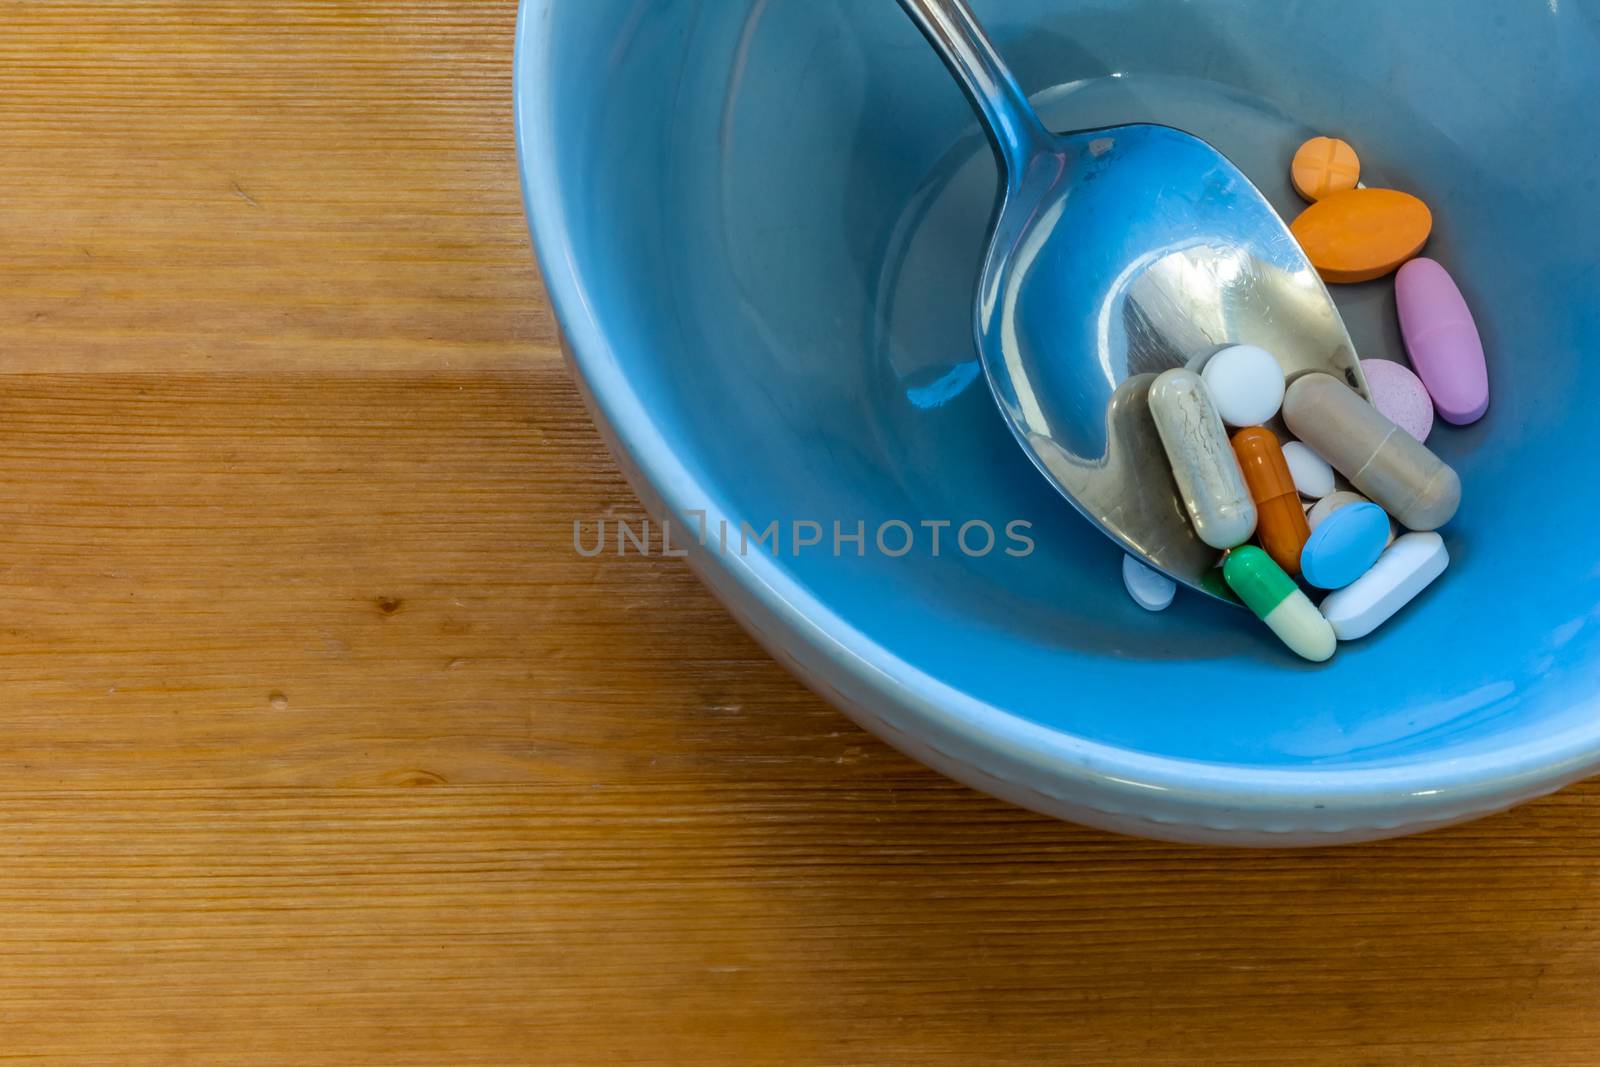 A collection of pills, including pharmaceutical drugs, vitamin tablets, over-the-counter medications and herbal supplements, appears in a soup bowl on a wooden table with a metal spoon.